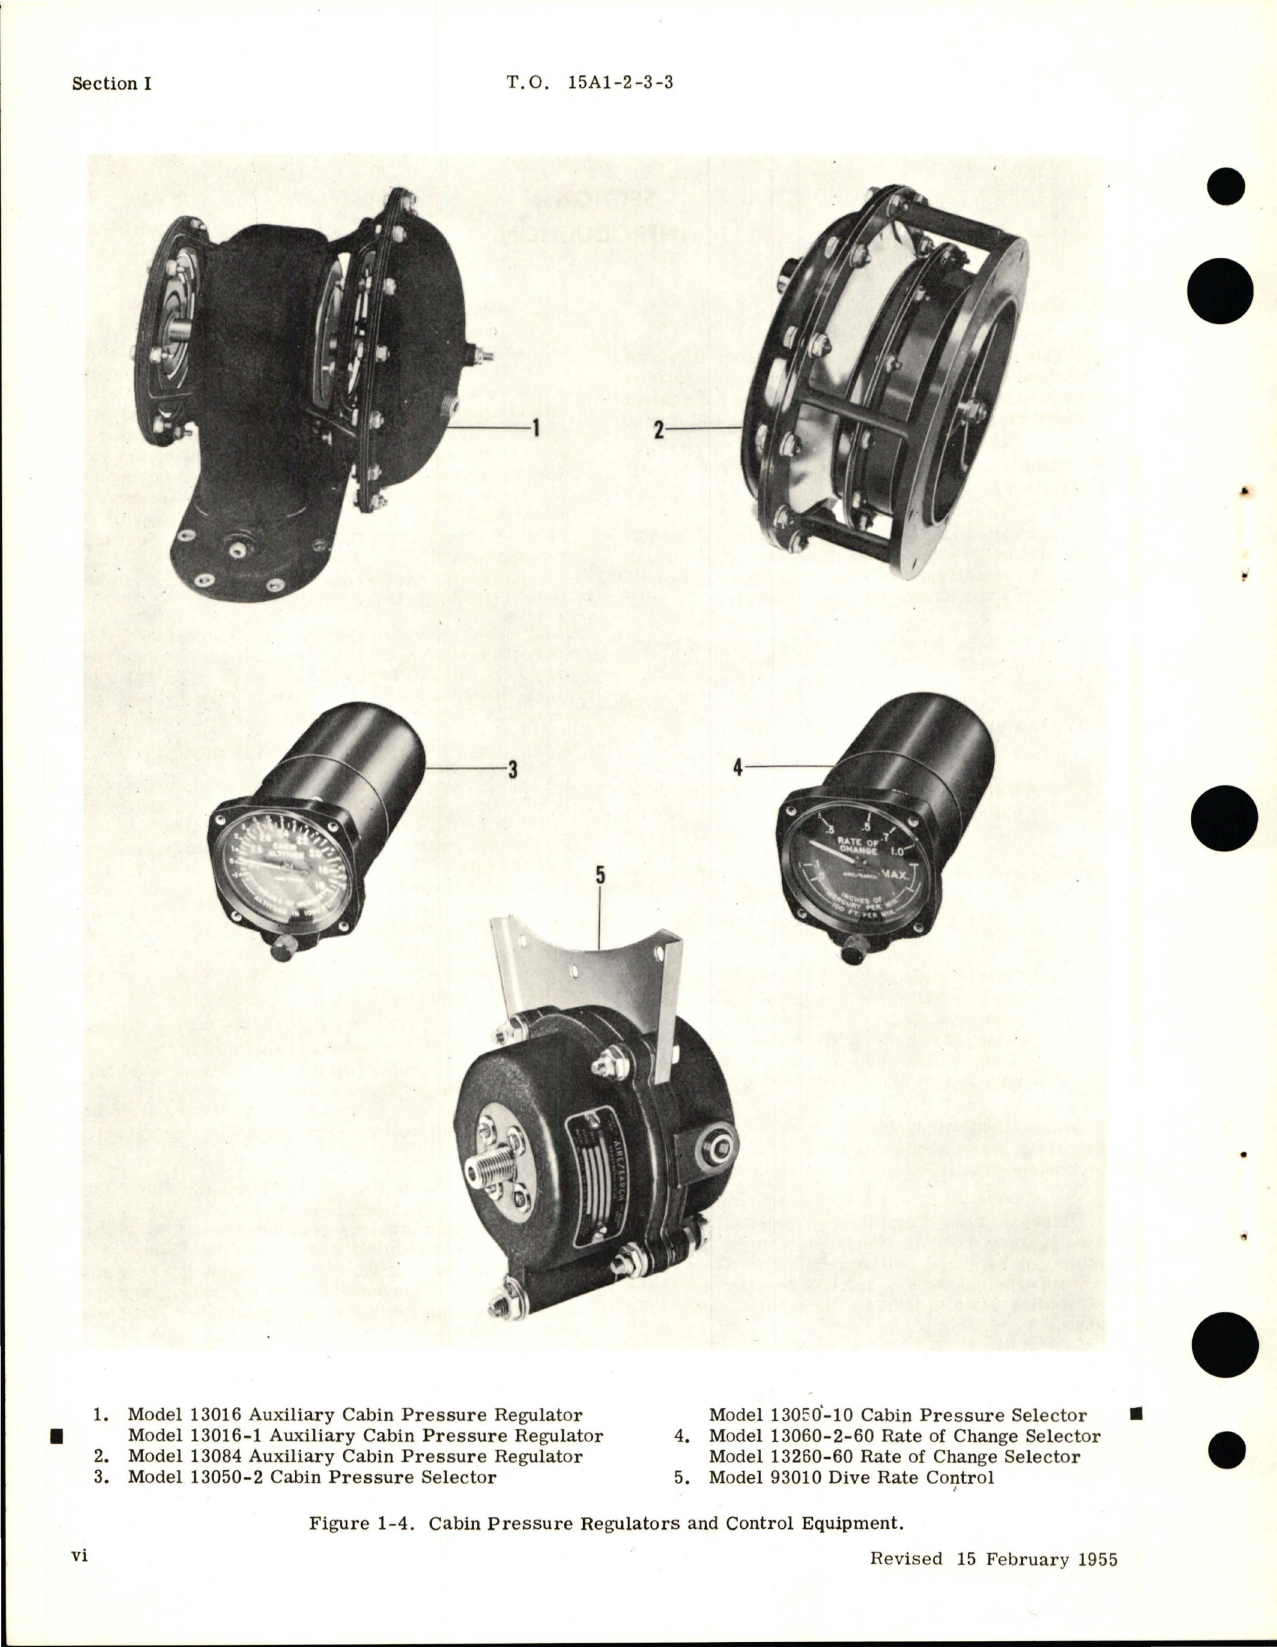 Sample page 8 from AirCorps Library document: Overhaul Instructions for Cabin Pressure Regulators